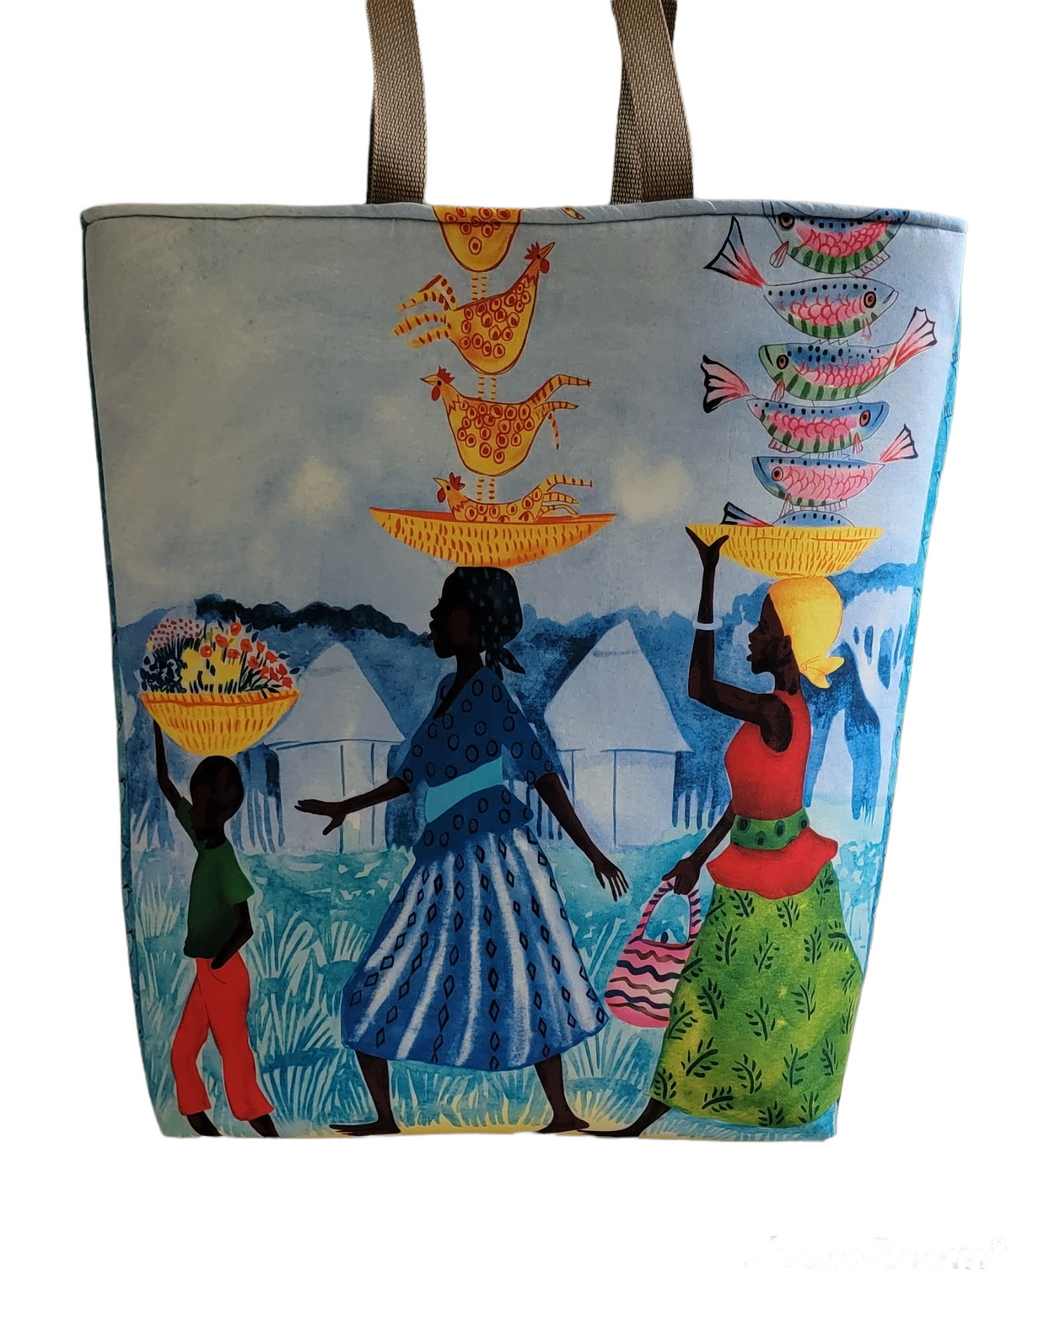 Women and Child Going to Market Tall Tote Bag